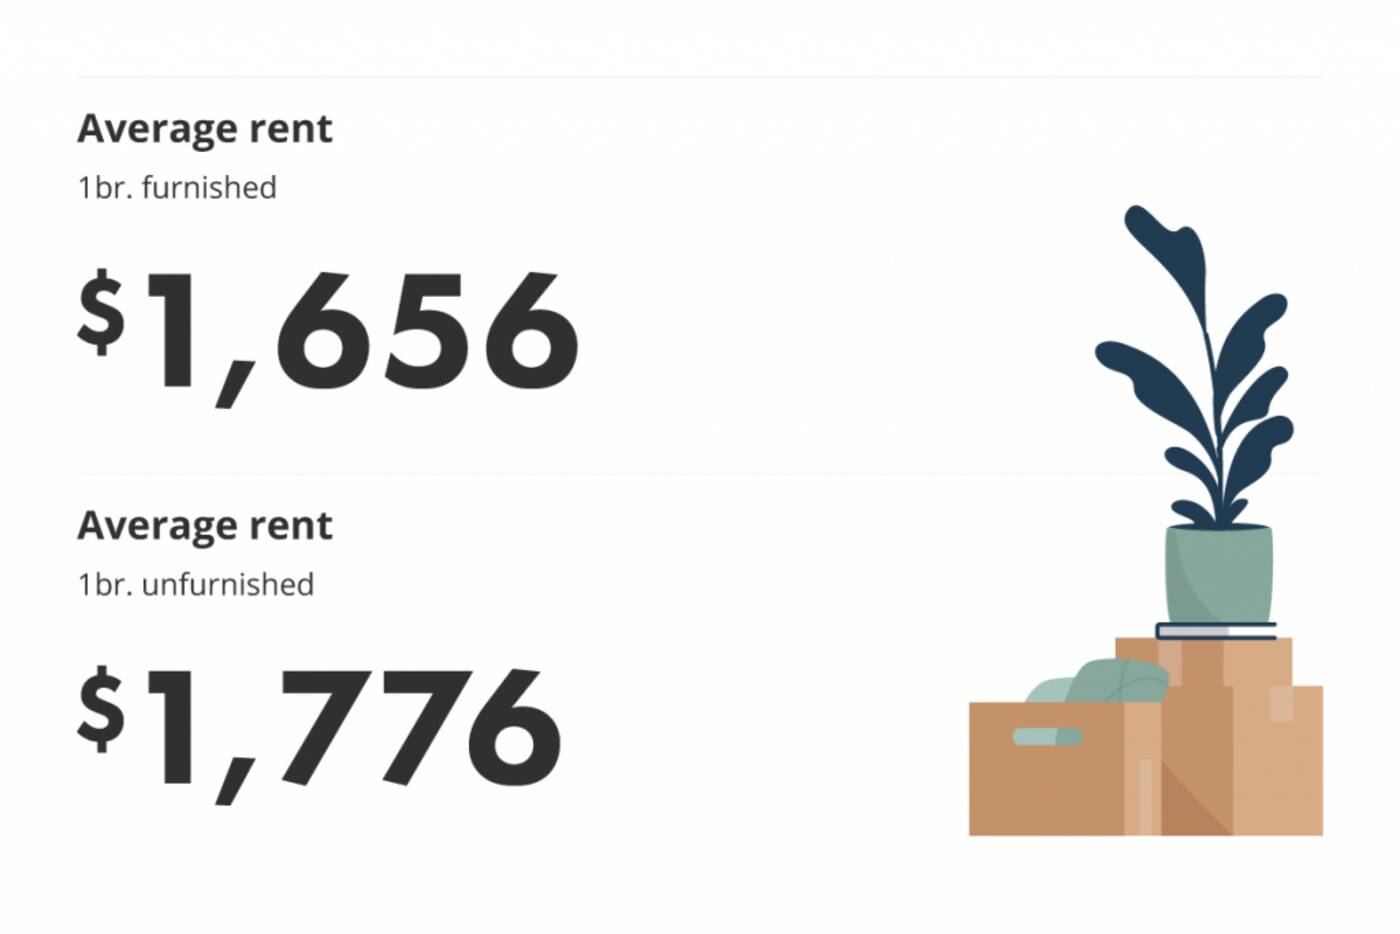 It's way cheaper to rent a furnished apartment than an empty one in